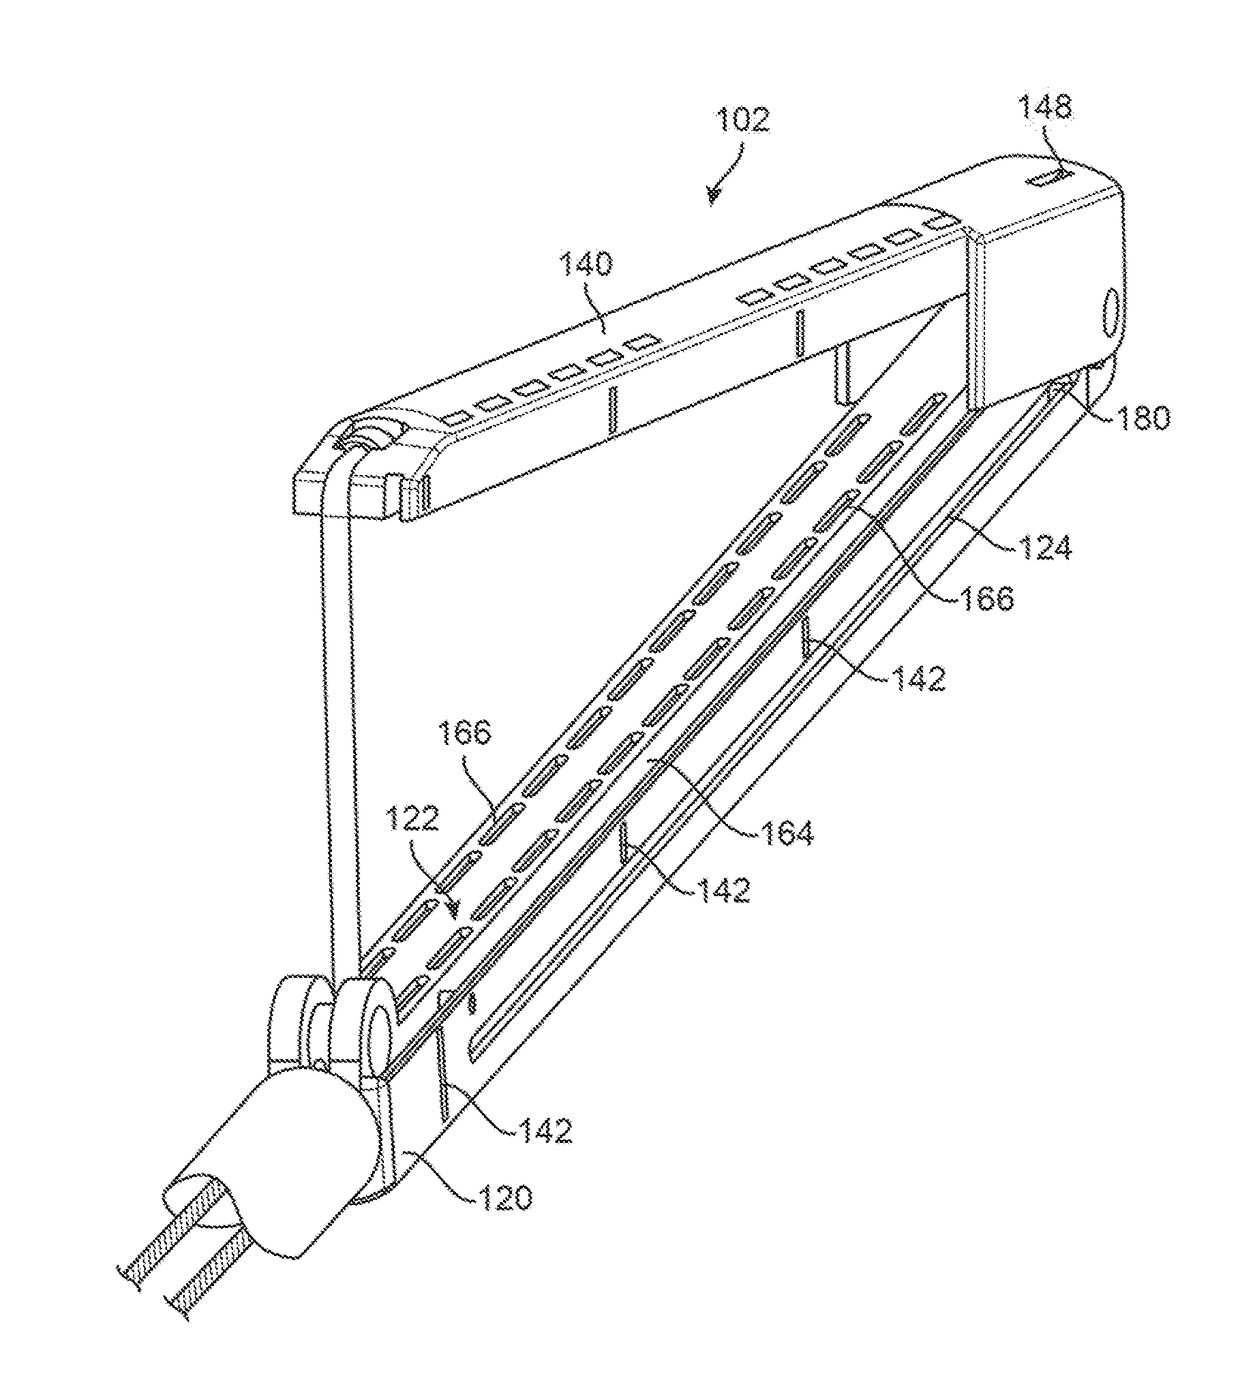 Tissue removal and closure device